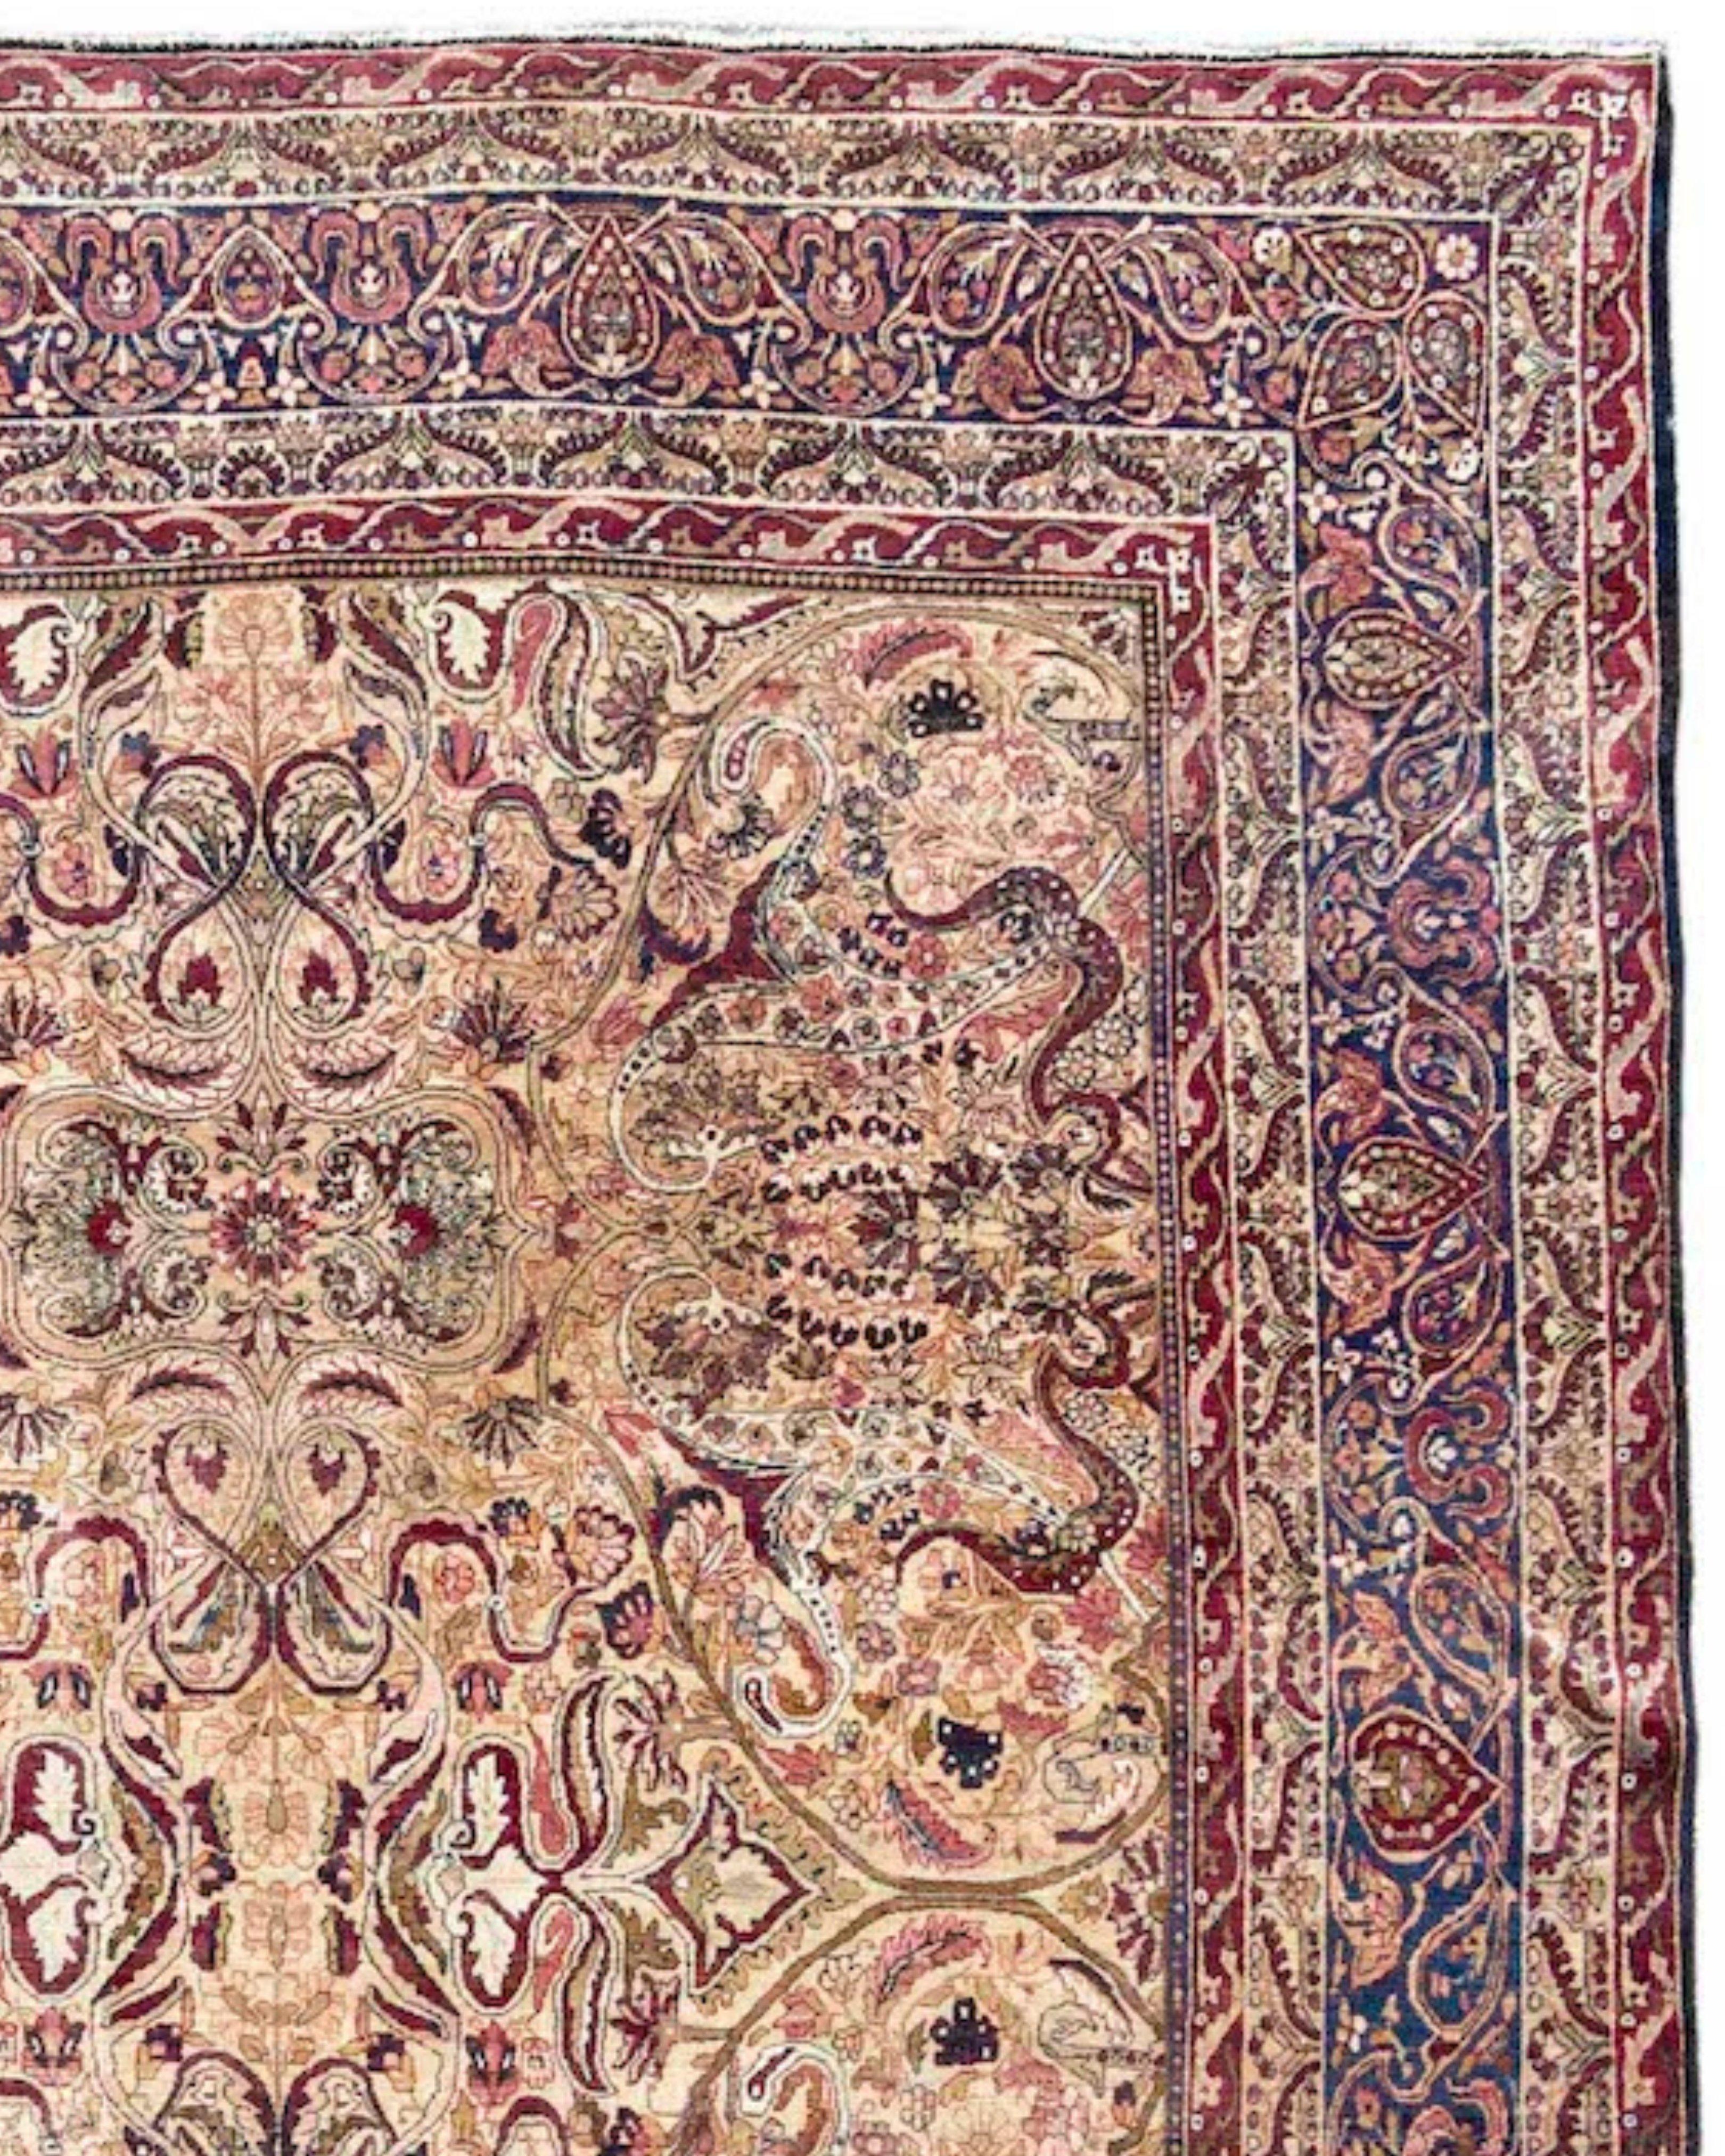 Antique Persian Lavar Kirman Carpet Rug, 19th Century

This elegant carpet was woven in the vicinity of the southeastern Persian city of Kirman. Kirman, or Kerman, as it is more typically pronounced, sits on the ancient trade road connecting Persia